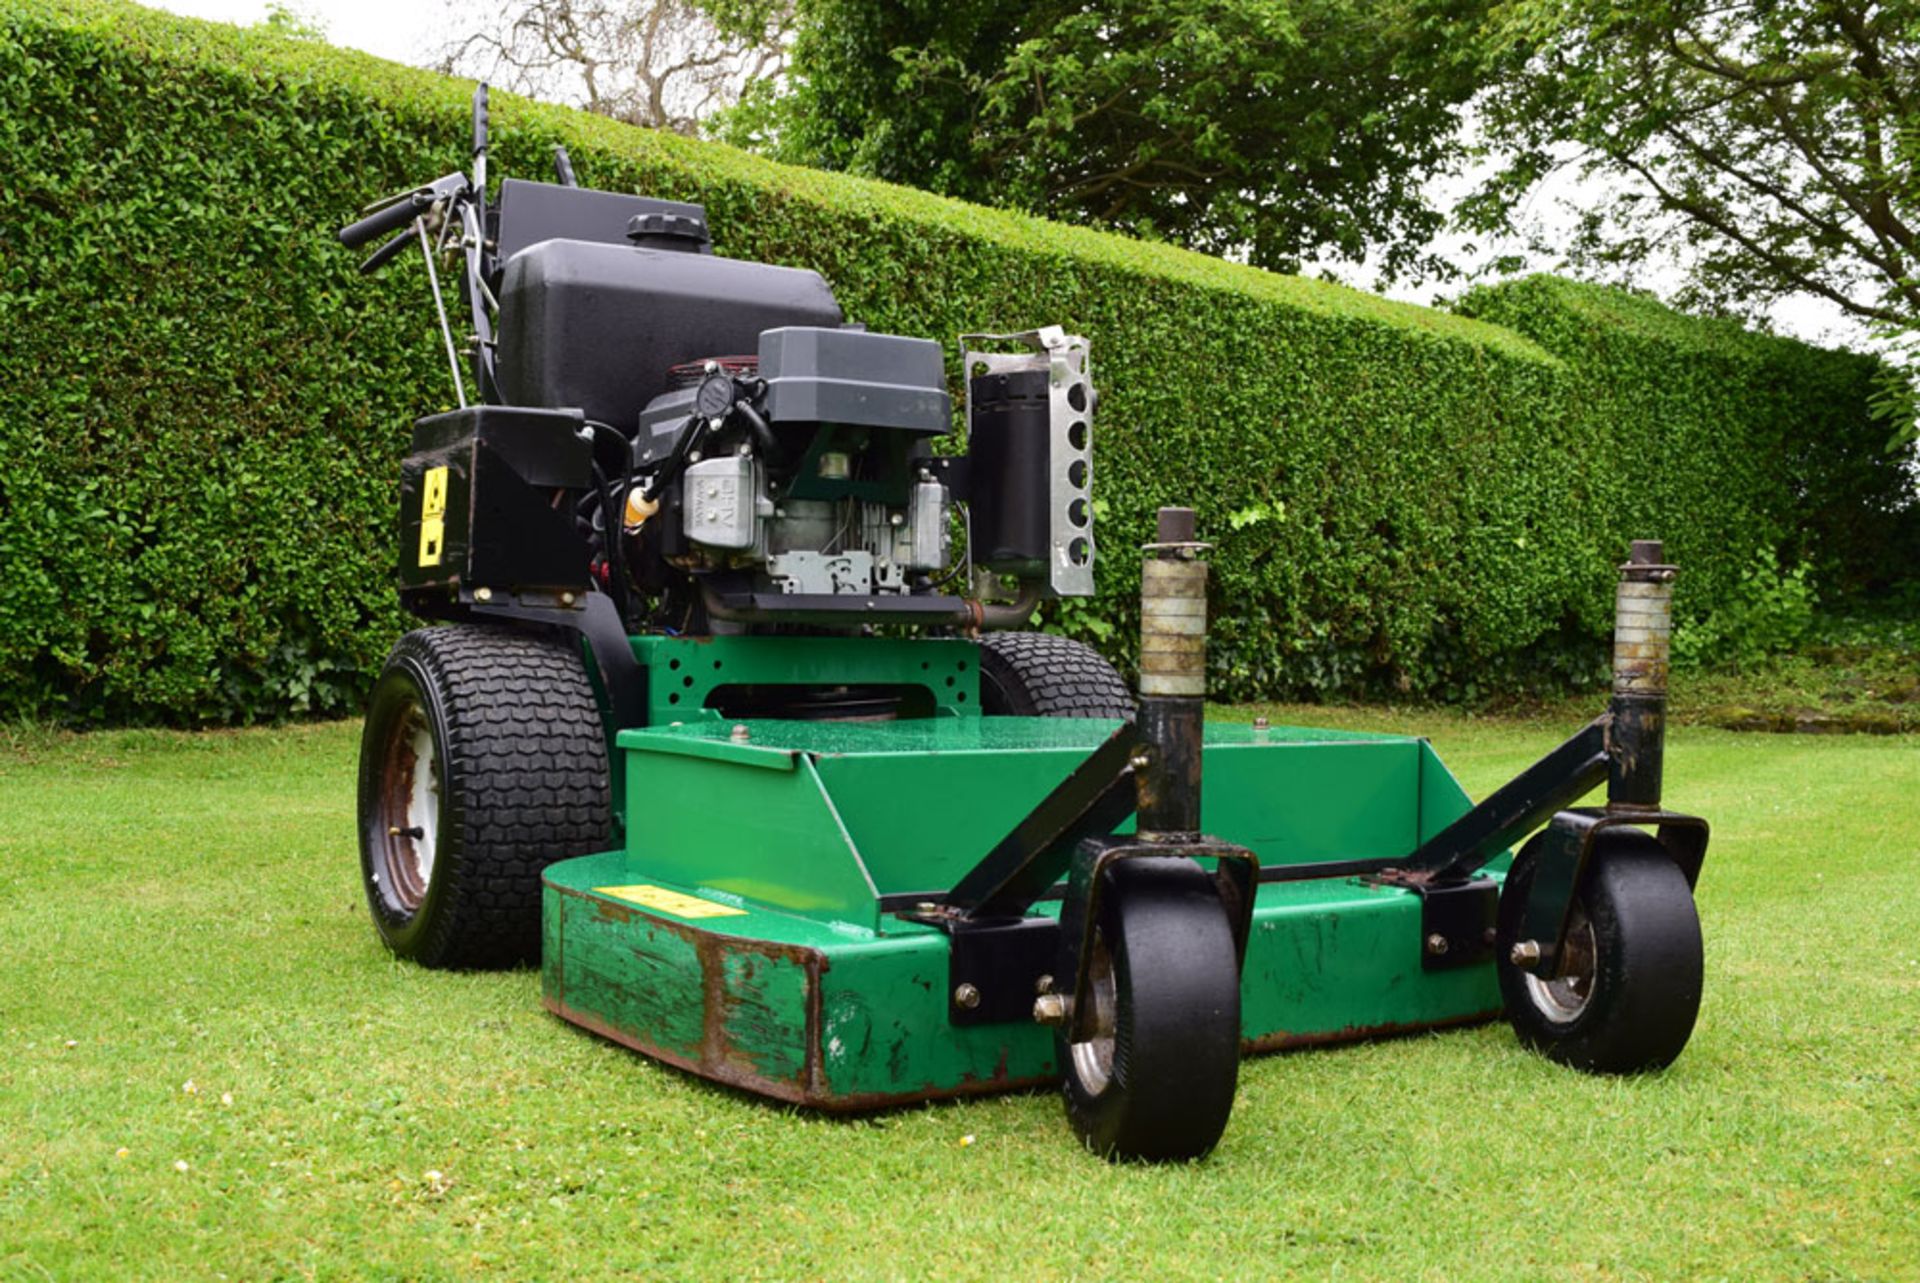 2008 Ransomes Pedestrian 36"""" Commercial Walk Behind Zero Turn Rotary Mower - Image 3 of 3